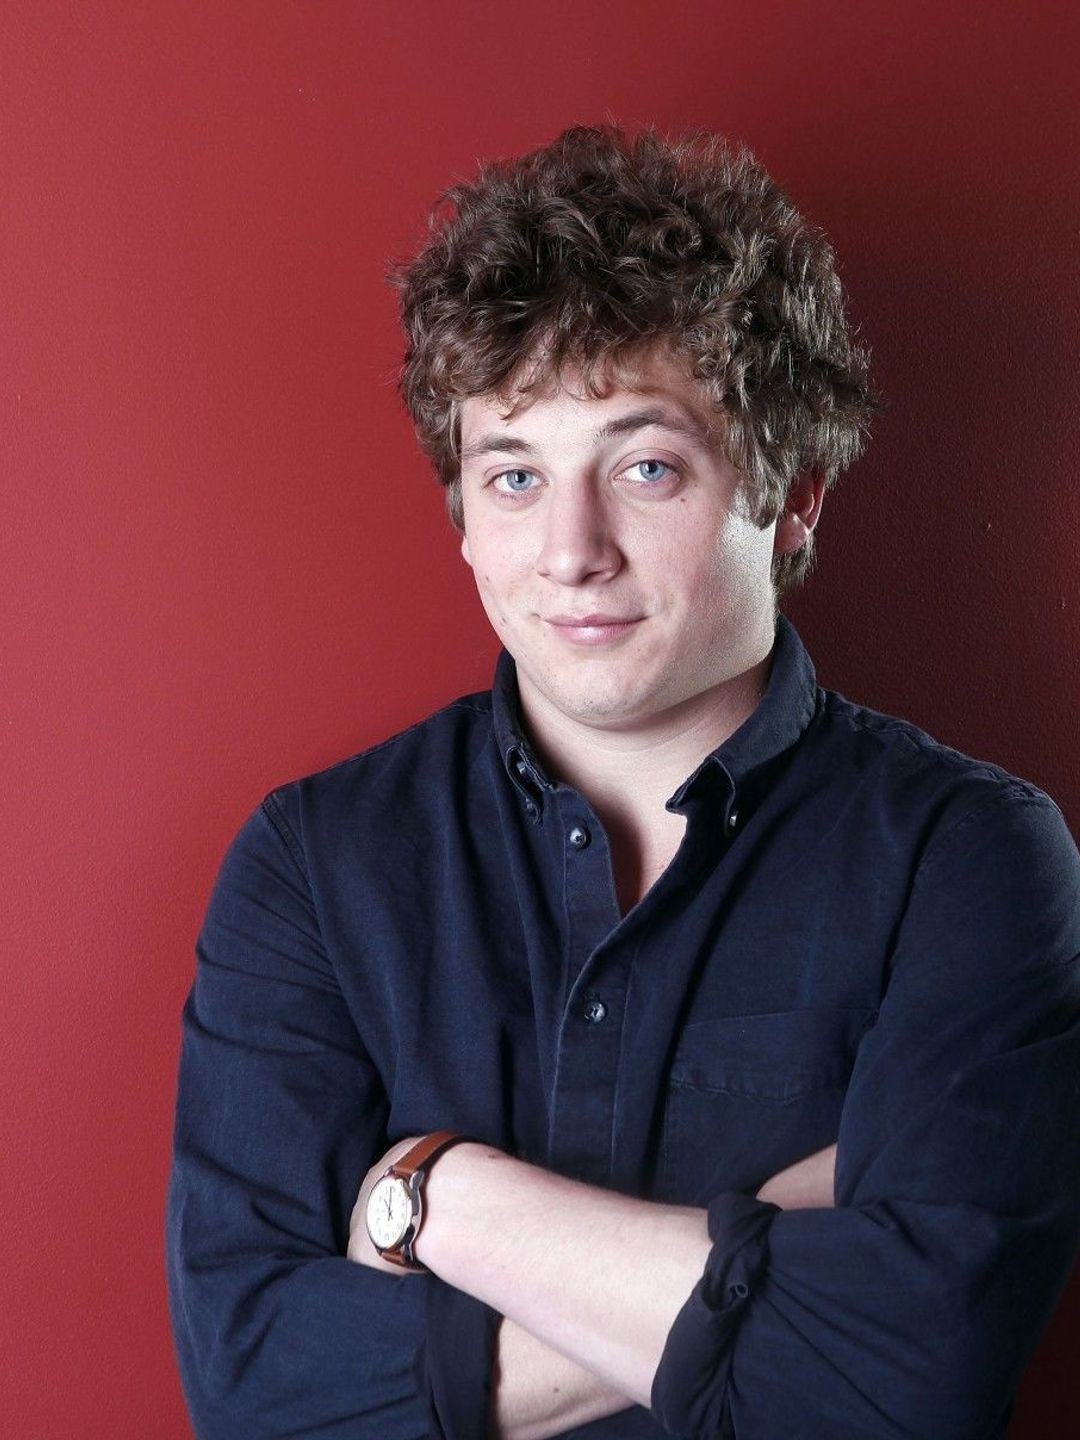 Jeremy Allen White in real life